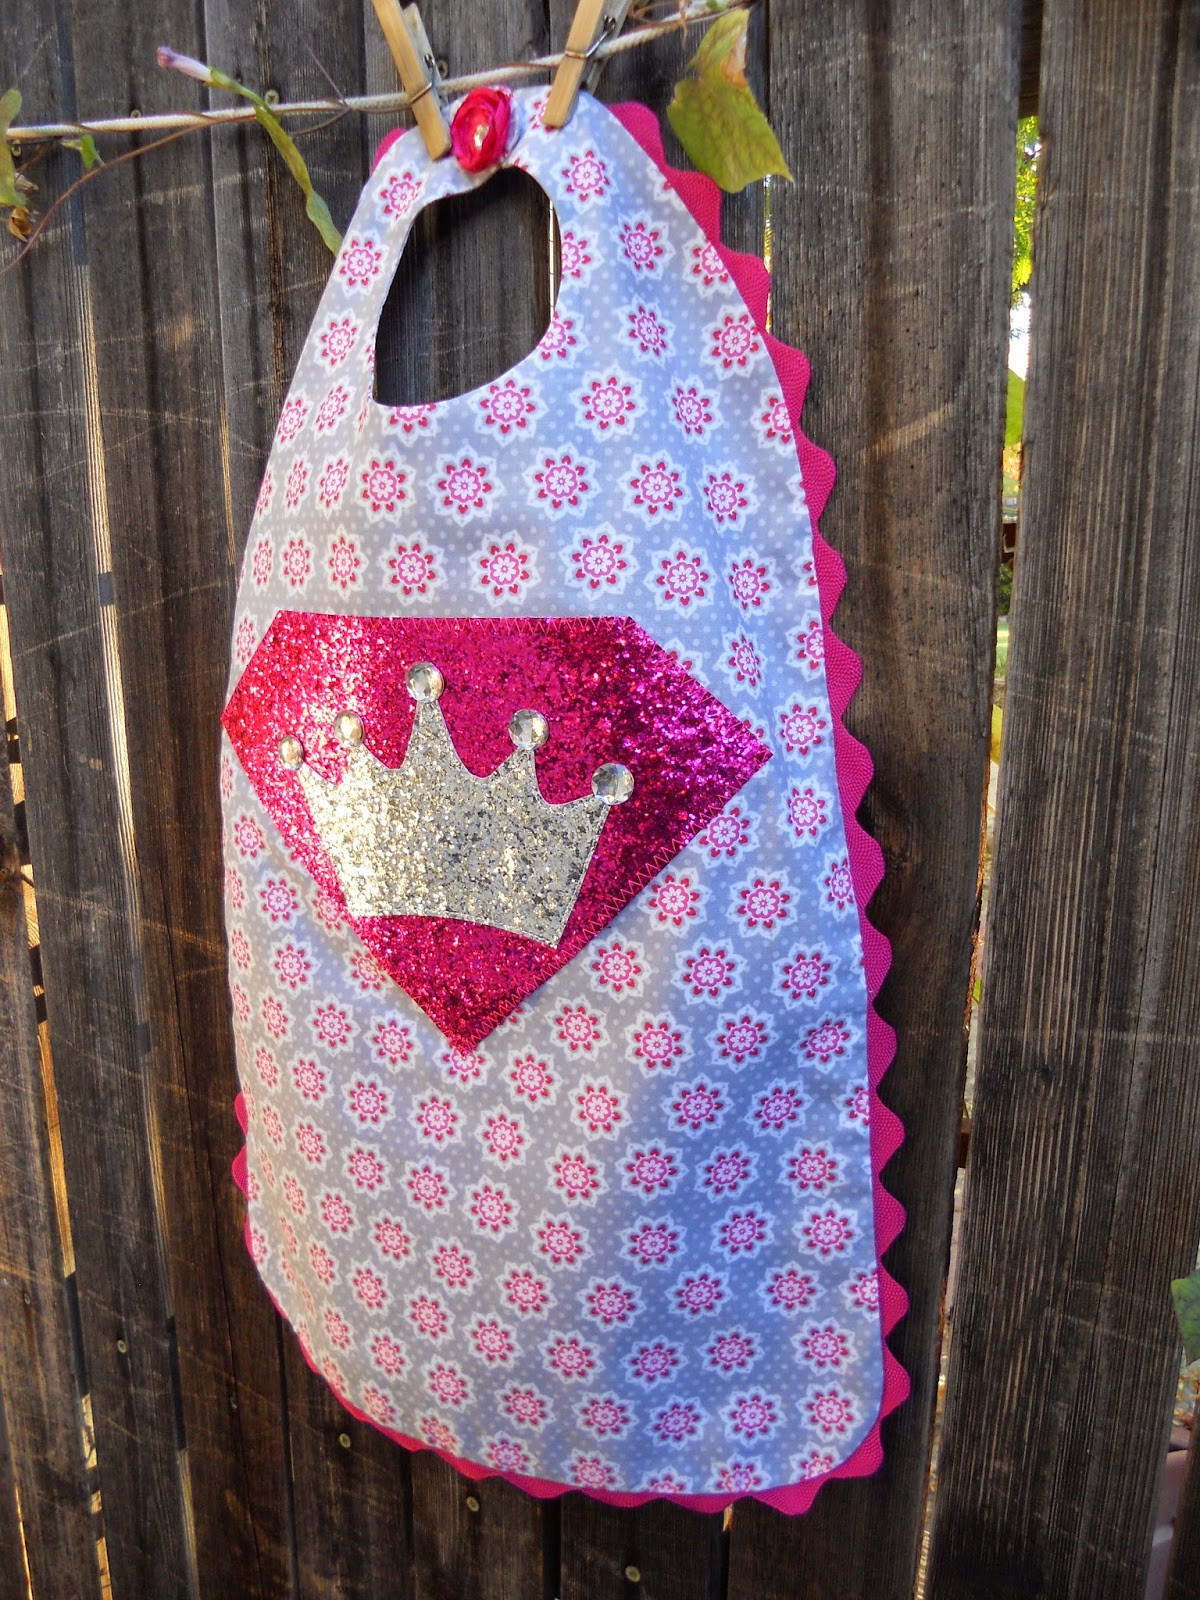 DIY Kids Cape
 Just Another Hang Up Little Girl Princess Superhero Capes